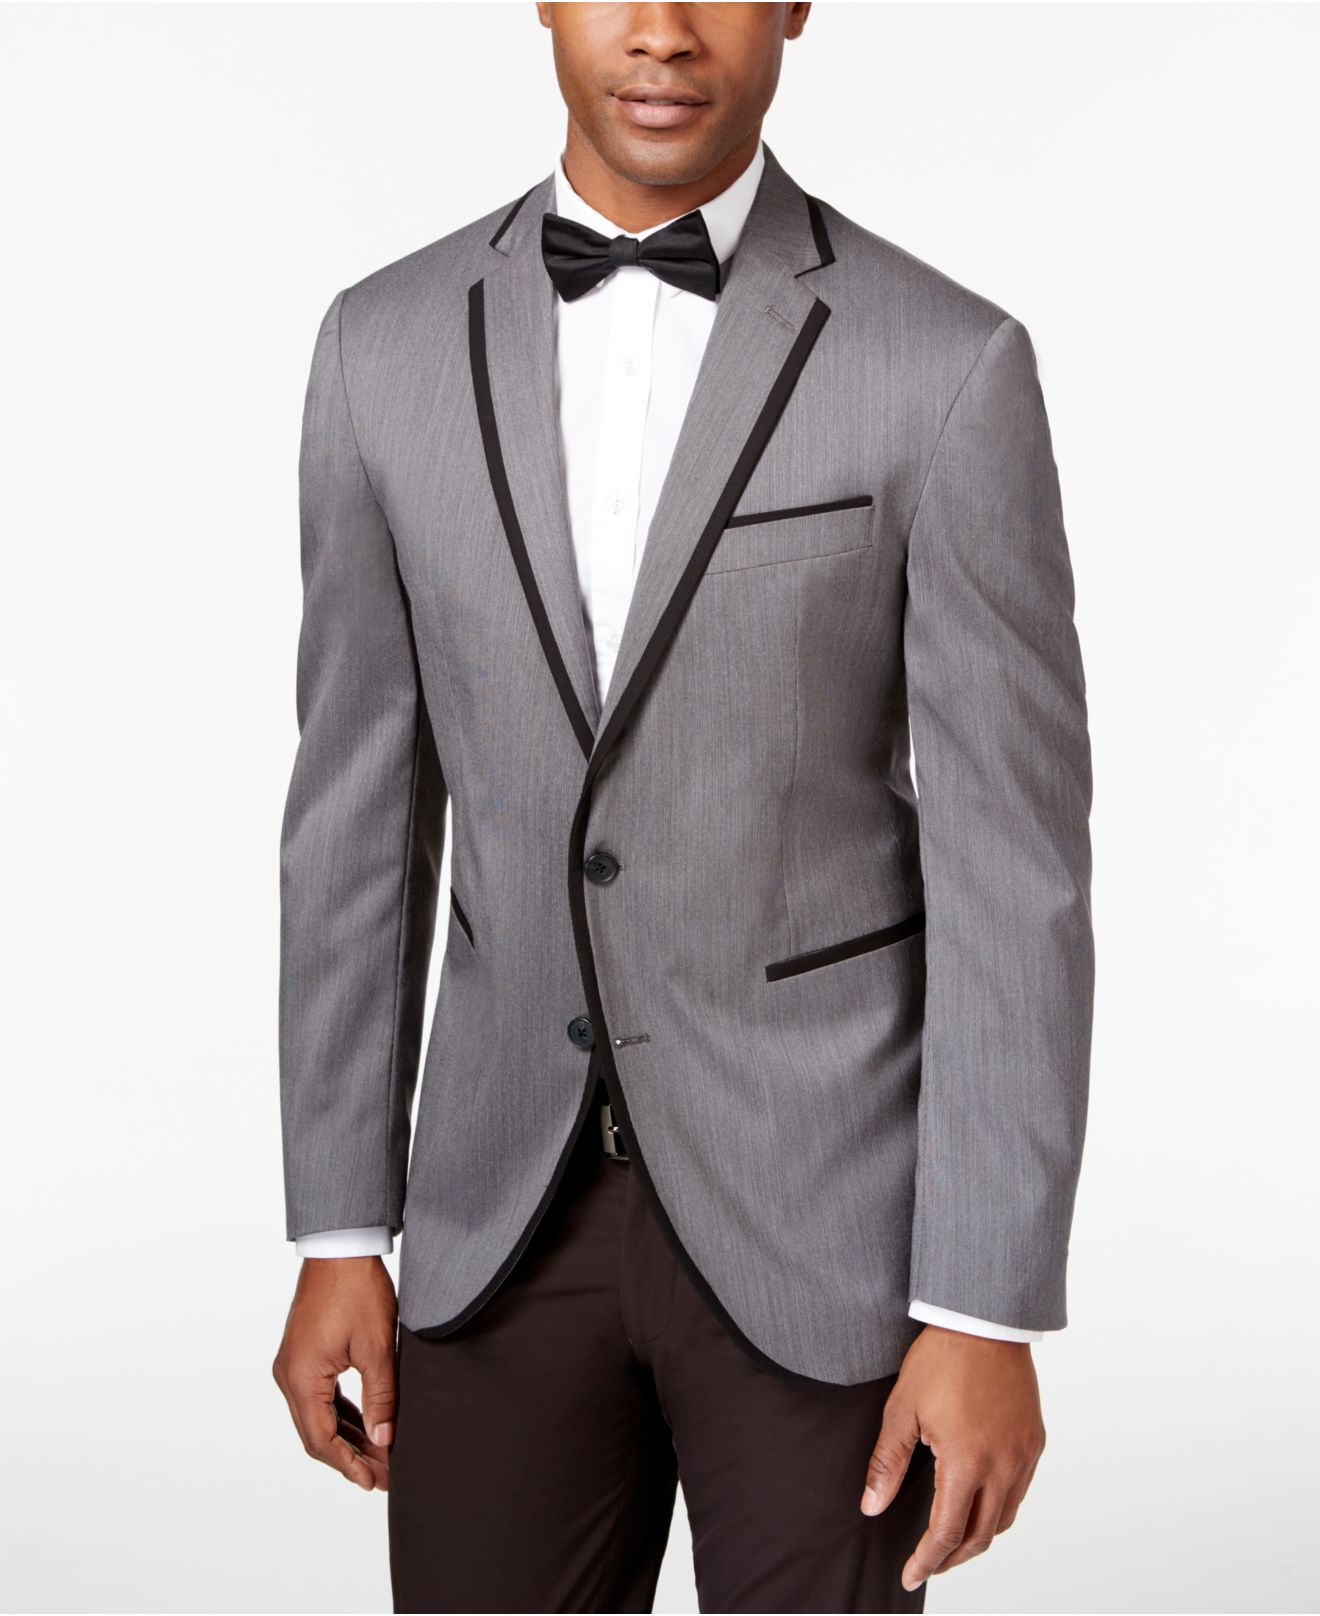 Lyst - Kenneth Cole Reaction Men's Microdot Slim-fit Dinner Jacket in ...